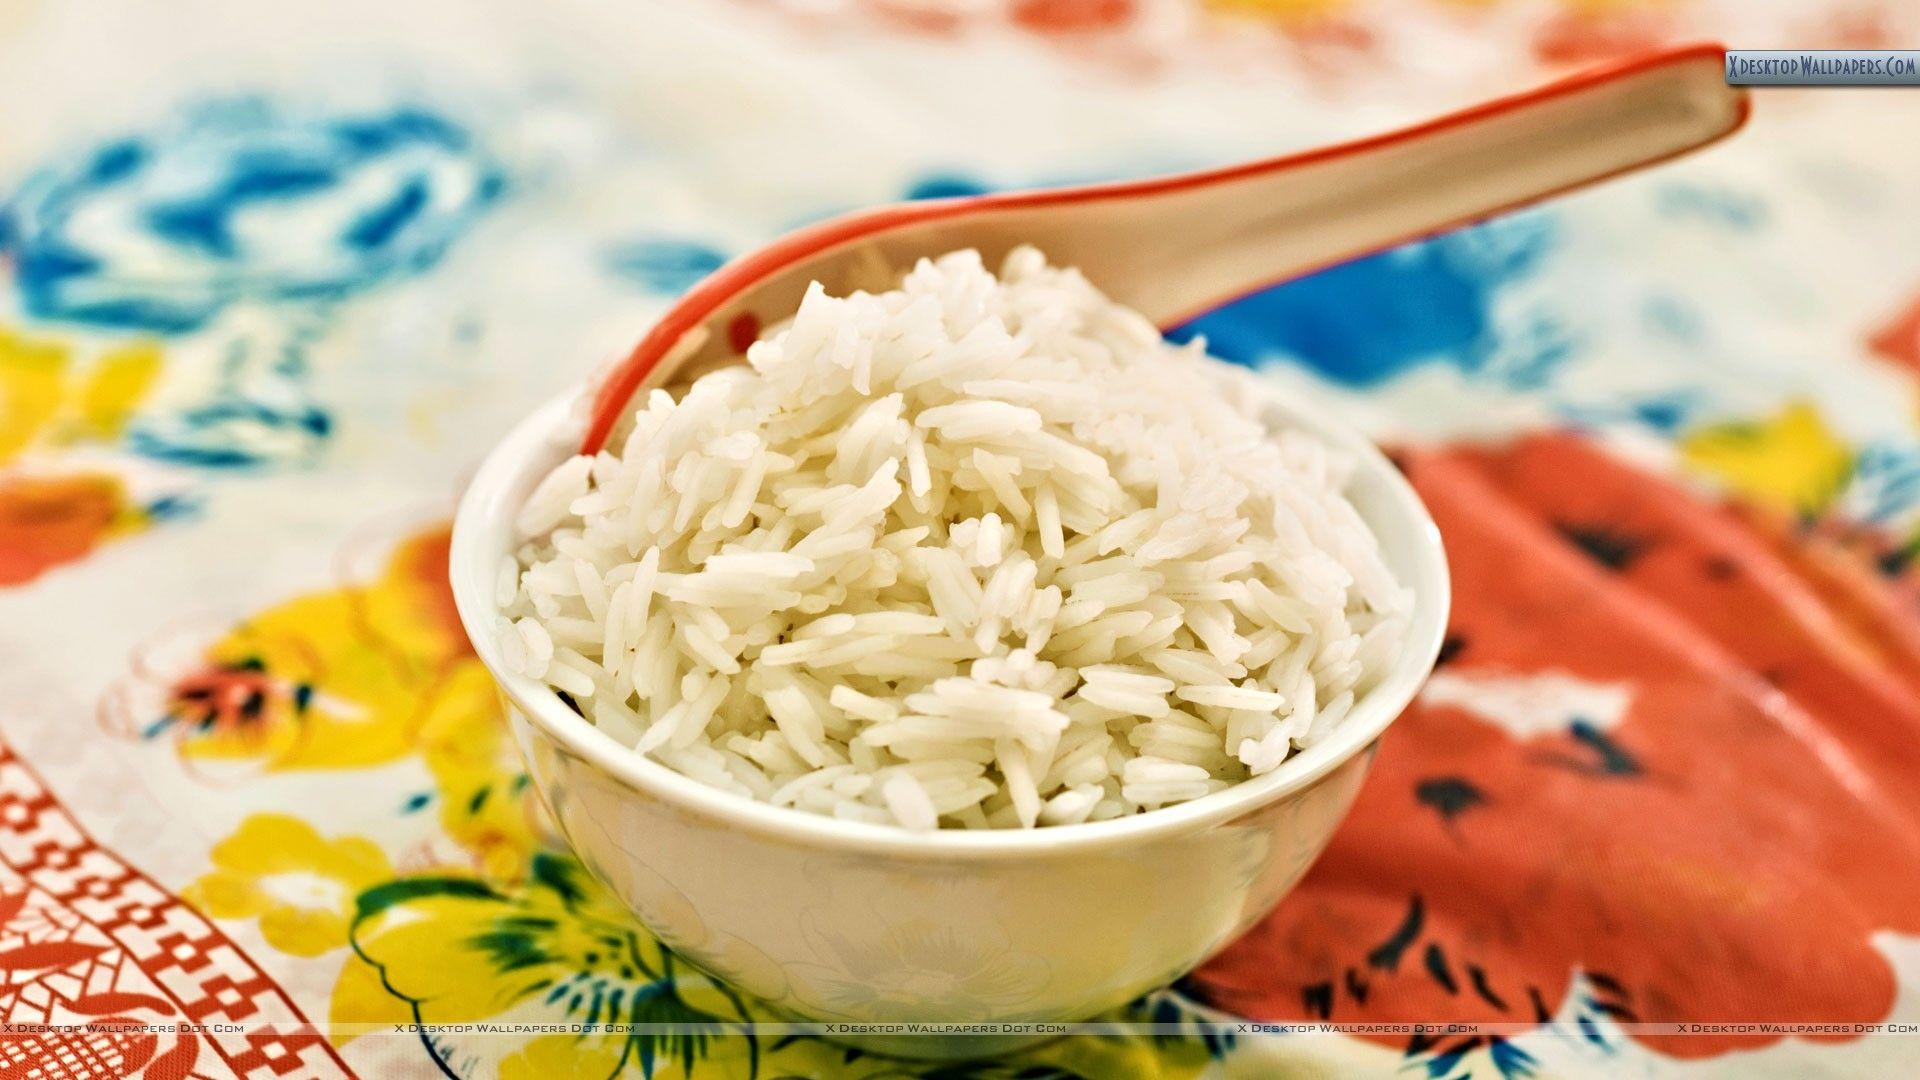 Rice In A Bowl on Table Wallpaper